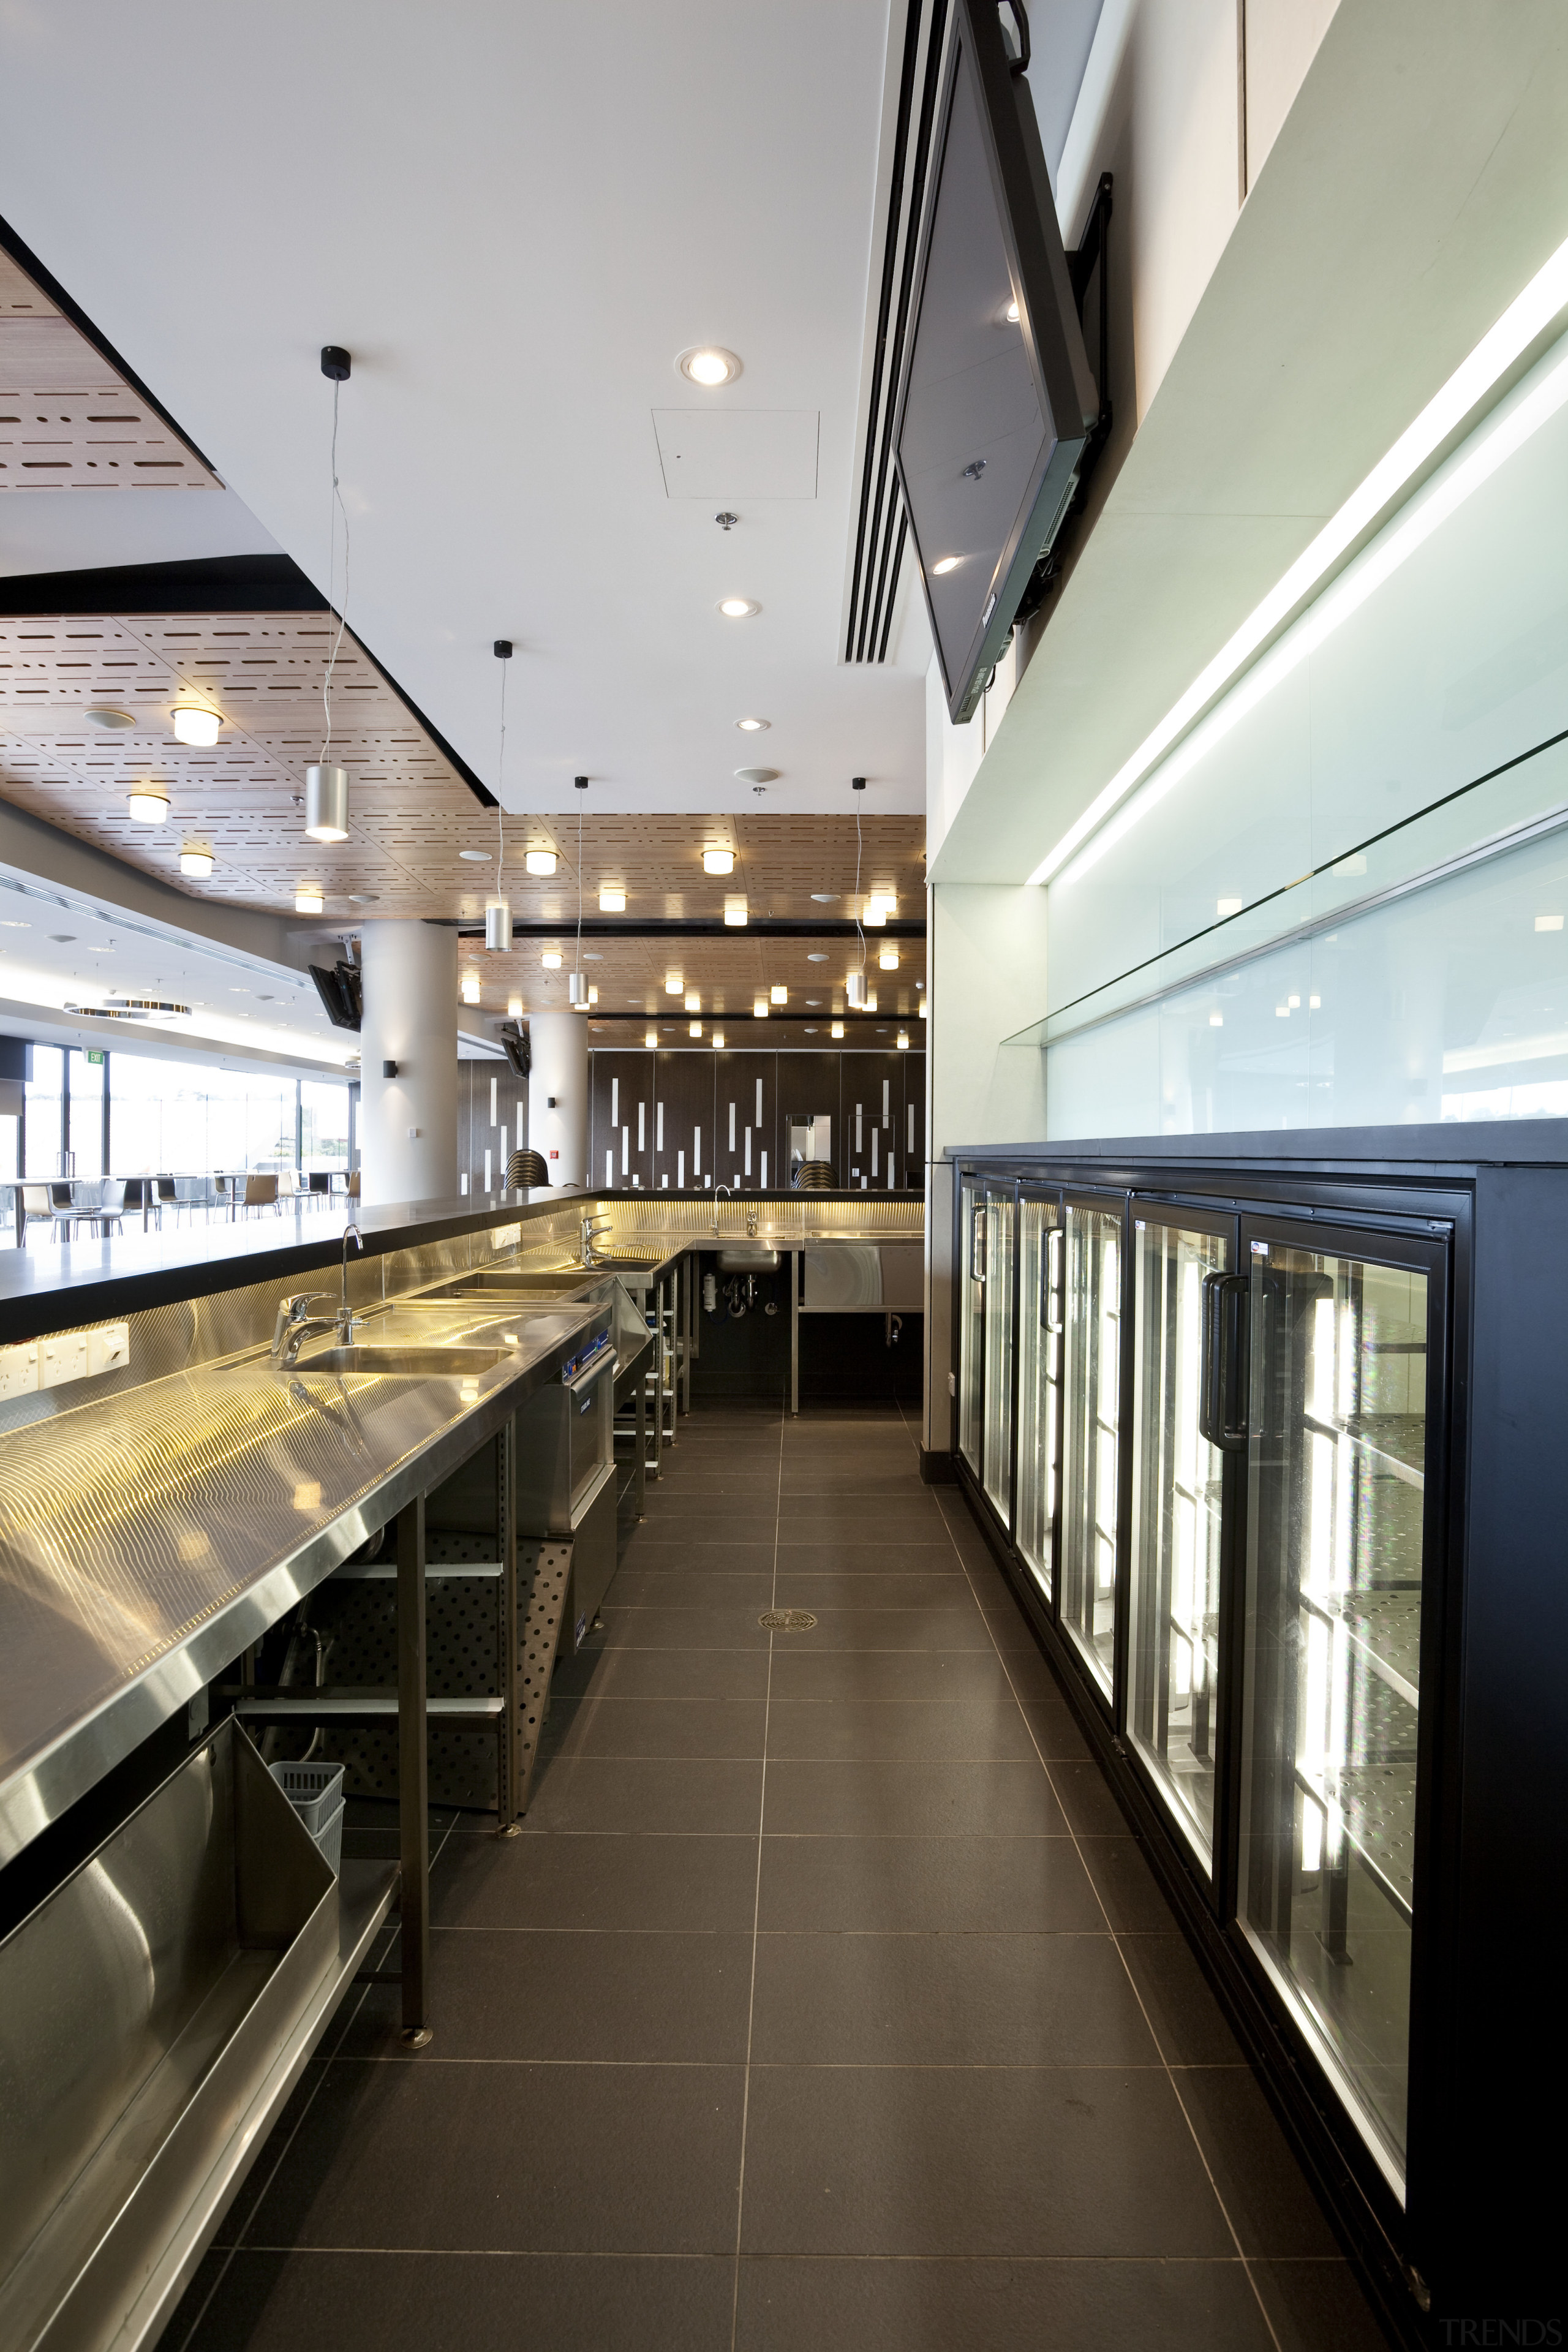 View of the front-of-house of a kitchen at architecture, ceiling, daylighting, interior design, lobby, brown, gray